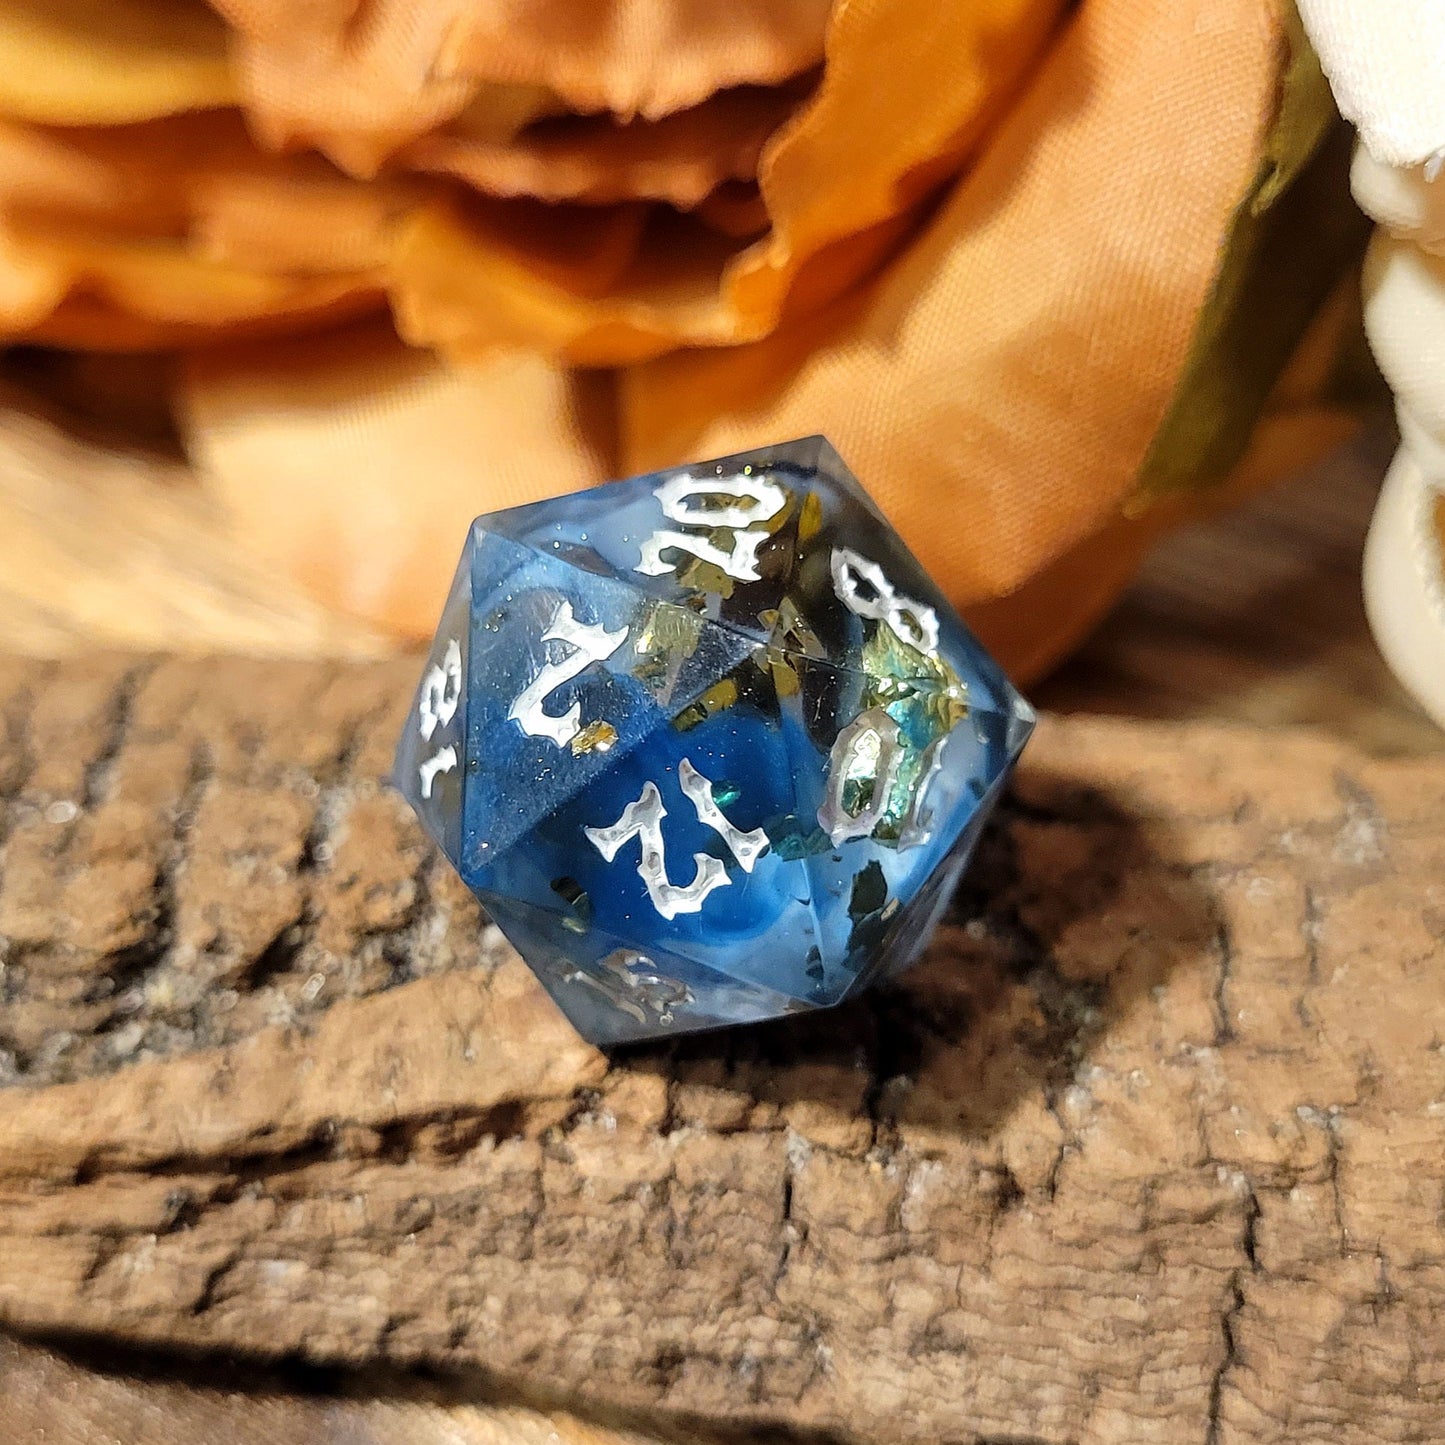 A twenty-sided die that has a clear base with black, white, and Oxford blue drips. The font is Sugar Bee RPG's signature death metal font, and is inked in white. The most prominent numbers are 20, 2, 18, 8, 12, and 10.